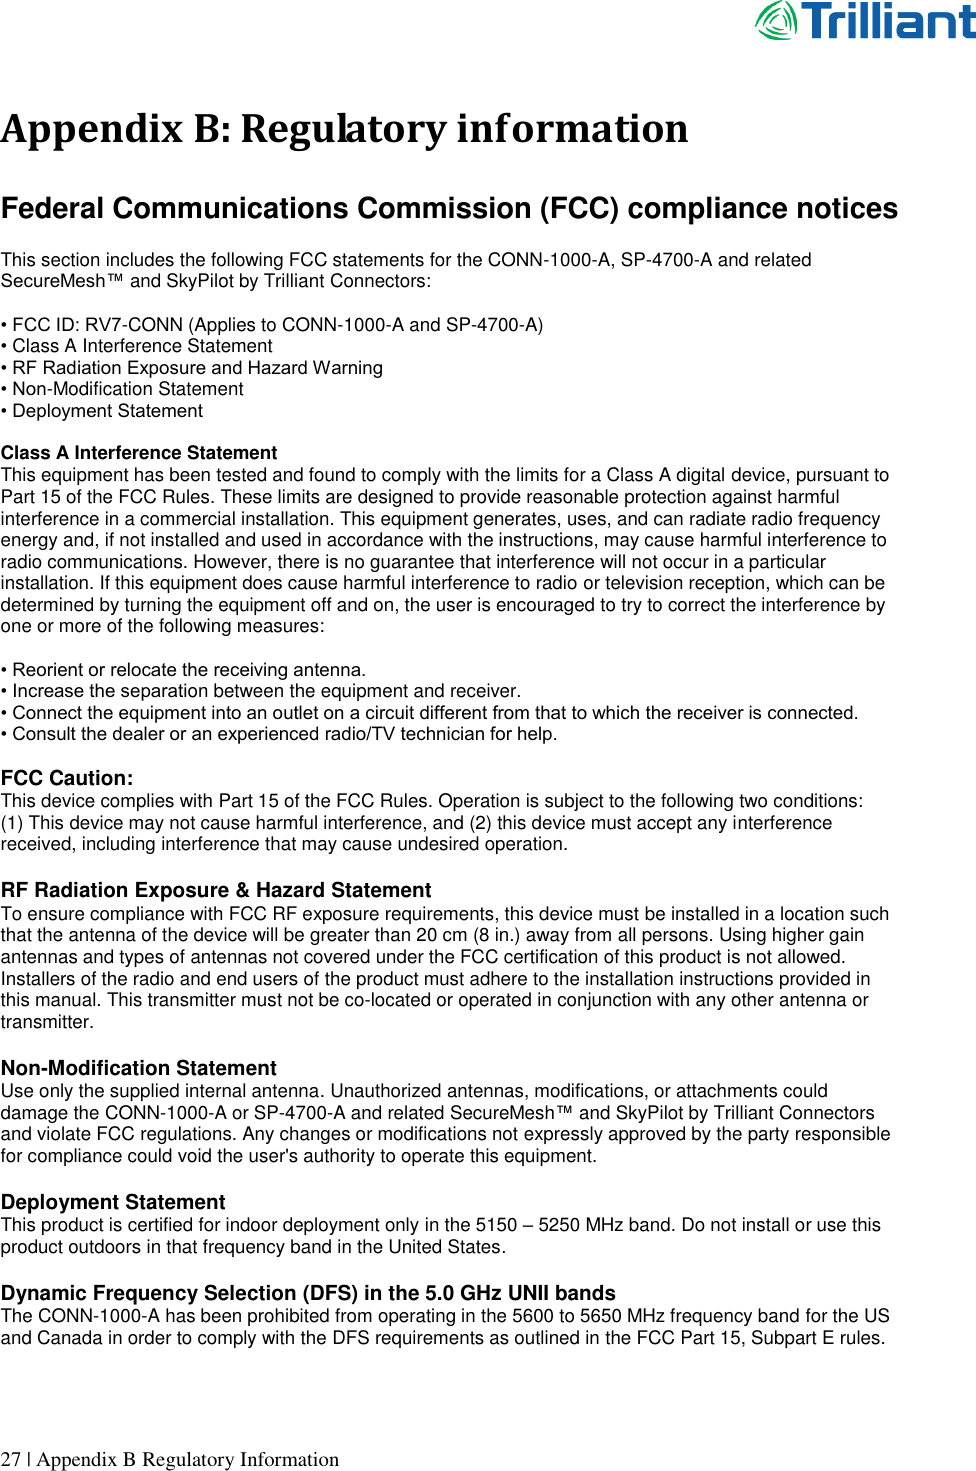      27 | Appendix B Regulatory Information  Appendix B: Regulatory information  Federal Communications Commission (FCC) compliance notices  This section includes the following FCC statements for the CONN-1000-A, SP-4700-A and related SecureMesh™ and SkyPilot by Trilliant Connectors:  • FCC ID: RV7-CONN (Applies to CONN-1000-A and SP-4700-A) • Class A Interference Statement • RF Radiation Exposure and Hazard Warning • Non-Modification Statement • Deployment Statement  Class A Interference Statement This equipment has been tested and found to comply with the limits for a Class A digital device, pursuant to Part 15 of the FCC Rules. These limits are designed to provide reasonable protection against harmful interference in a commercial installation. This equipment generates, uses, and can radiate radio frequency energy and, if not installed and used in accordance with the instructions, may cause harmful interference to radio communications. However, there is no guarantee that interference will not occur in a particular installation. If this equipment does cause harmful interference to radio or television reception, which can be determined by turning the equipment off and on, the user is encouraged to try to correct the interference by one or more of the following measures:  • Reorient or relocate the receiving antenna. • Increase the separation between the equipment and receiver. • Connect the equipment into an outlet on a circuit different from that to which the receiver is connected. • Consult the dealer or an experienced radio/TV technician for help.  FCC Caution: This device complies with Part 15 of the FCC Rules. Operation is subject to the following two conditions:    (1) This device may not cause harmful interference, and (2) this device must accept any interference received, including interference that may cause undesired operation.  RF Radiation Exposure &amp; Hazard Statement To ensure compliance with FCC RF exposure requirements, this device must be installed in a location such that the antenna of the device will be greater than 20 cm (8 in.) away from all persons. Using higher gain antennas and types of antennas not covered under the FCC certification of this product is not allowed. Installers of the radio and end users of the product must adhere to the installation instructions provided in this manual. This transmitter must not be co-located or operated in conjunction with any other antenna or transmitter.  Non-Modification Statement Use only the supplied internal antenna. Unauthorized antennas, modifications, or attachments could damage the CONN-1000-A or SP-4700-A and related SecureMesh™ and SkyPilot by Trilliant Connectors and violate FCC regulations. Any changes or modifications not expressly approved by the party responsible for compliance could void the user&apos;s authority to operate this equipment.  Deployment Statement This product is certified for indoor deployment only in the 5150 – 5250 MHz band. Do not install or use this product outdoors in that frequency band in the United States.  Dynamic Frequency Selection (DFS) in the 5.0 GHz UNII bands The CONN-1000-A has been prohibited from operating in the 5600 to 5650 MHz frequency band for the US and Canada in order to comply with the DFS requirements as outlined in the FCC Part 15, Subpart E rules.   